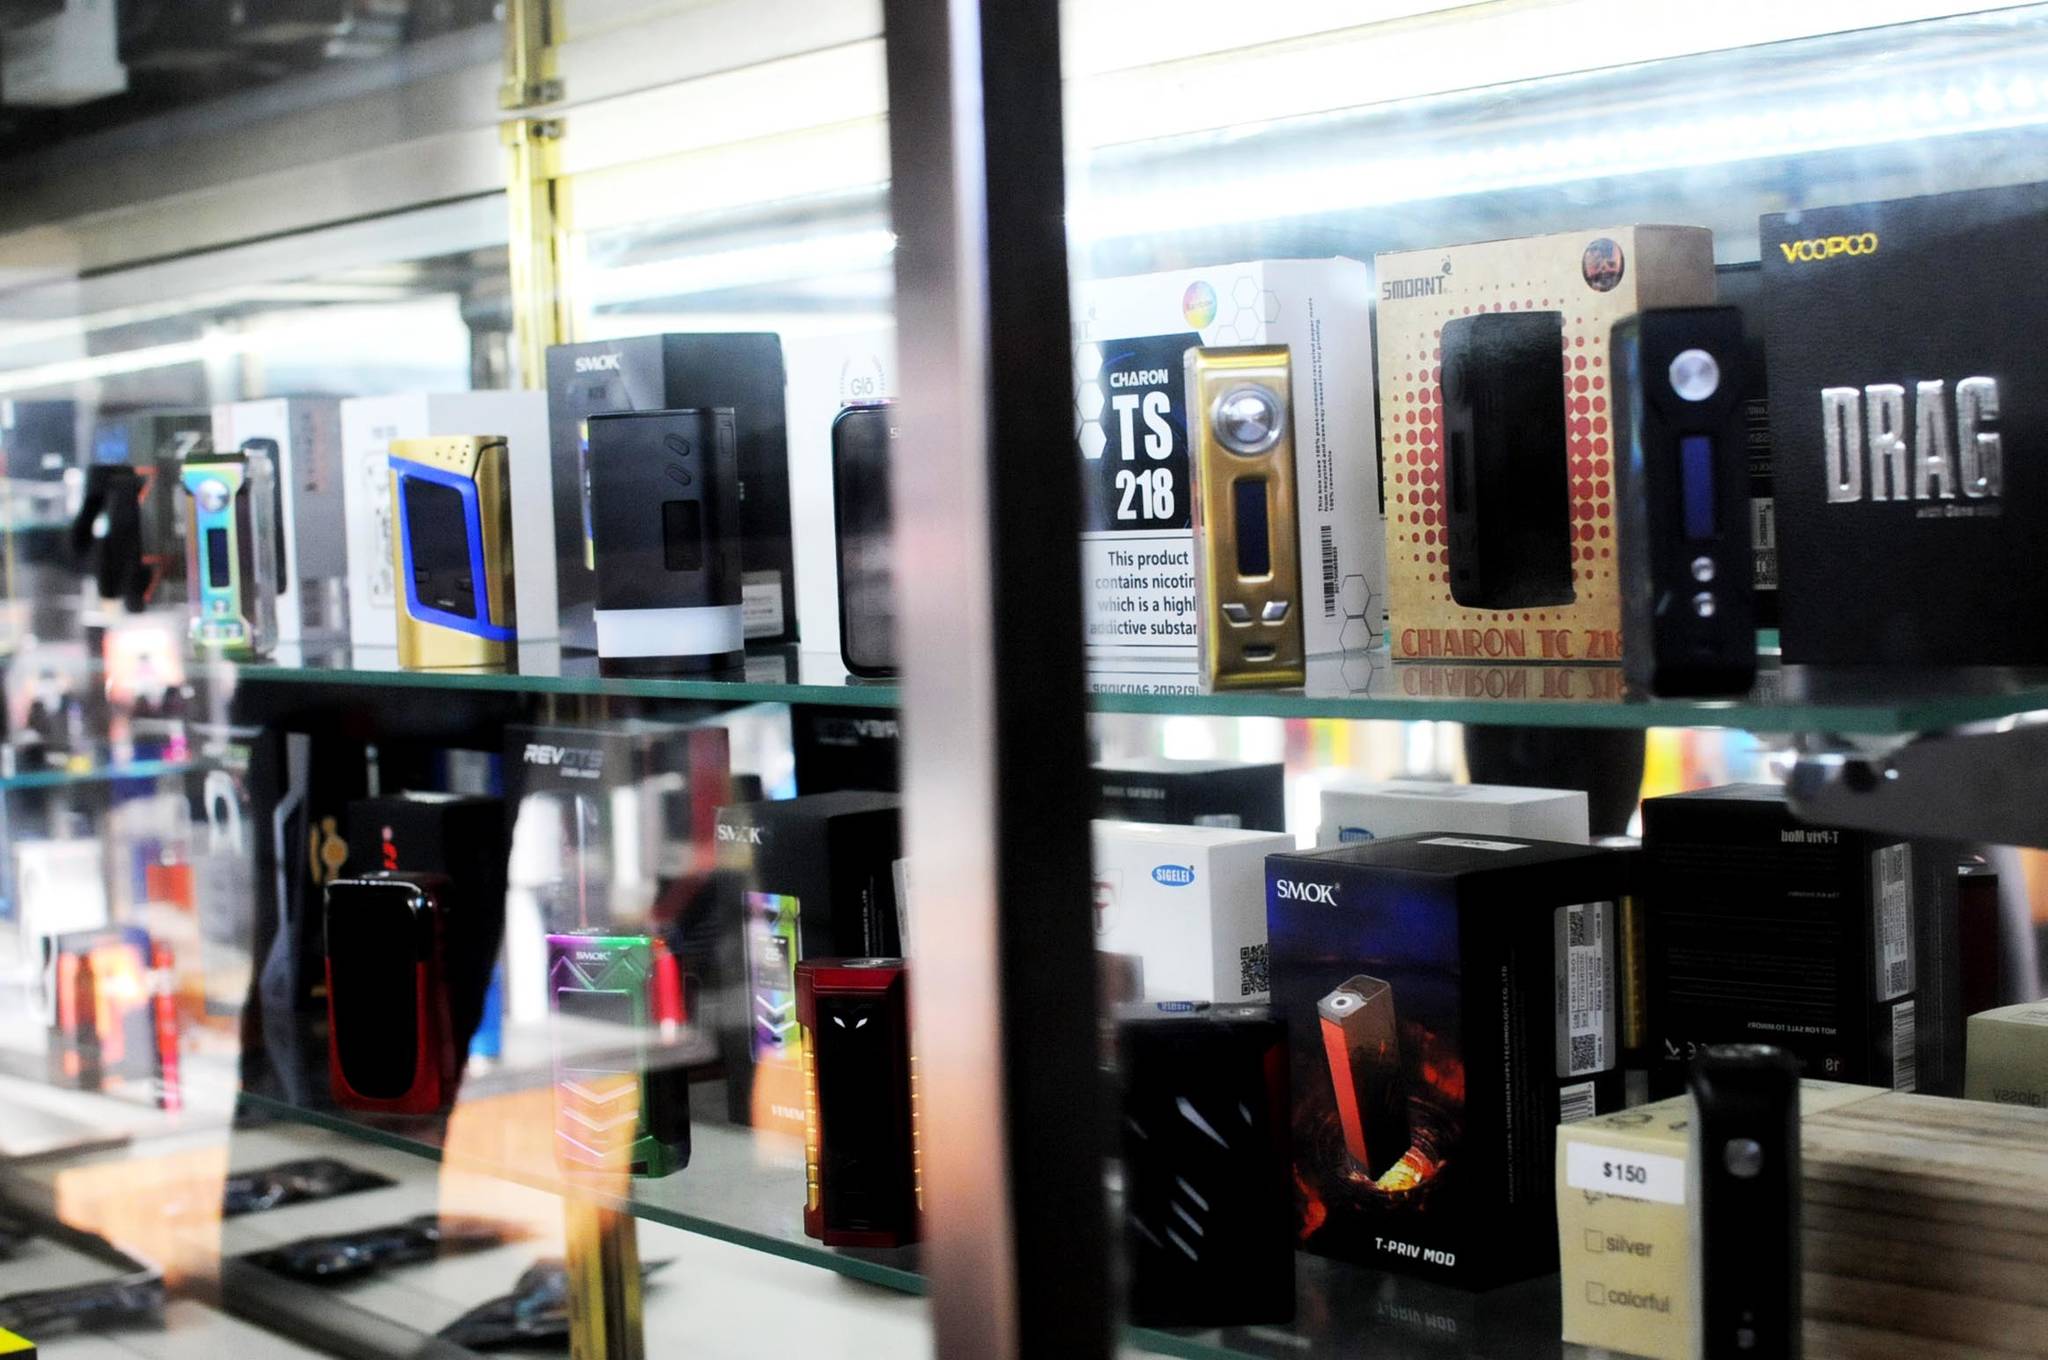 Electronic cigarette equipment lines the shelves at 5150 Vapes on Monday, Jan. 29, 2018 in Soldotna, Alaska. (Photo by Elizabeth Earl/Peninsula Clarion)